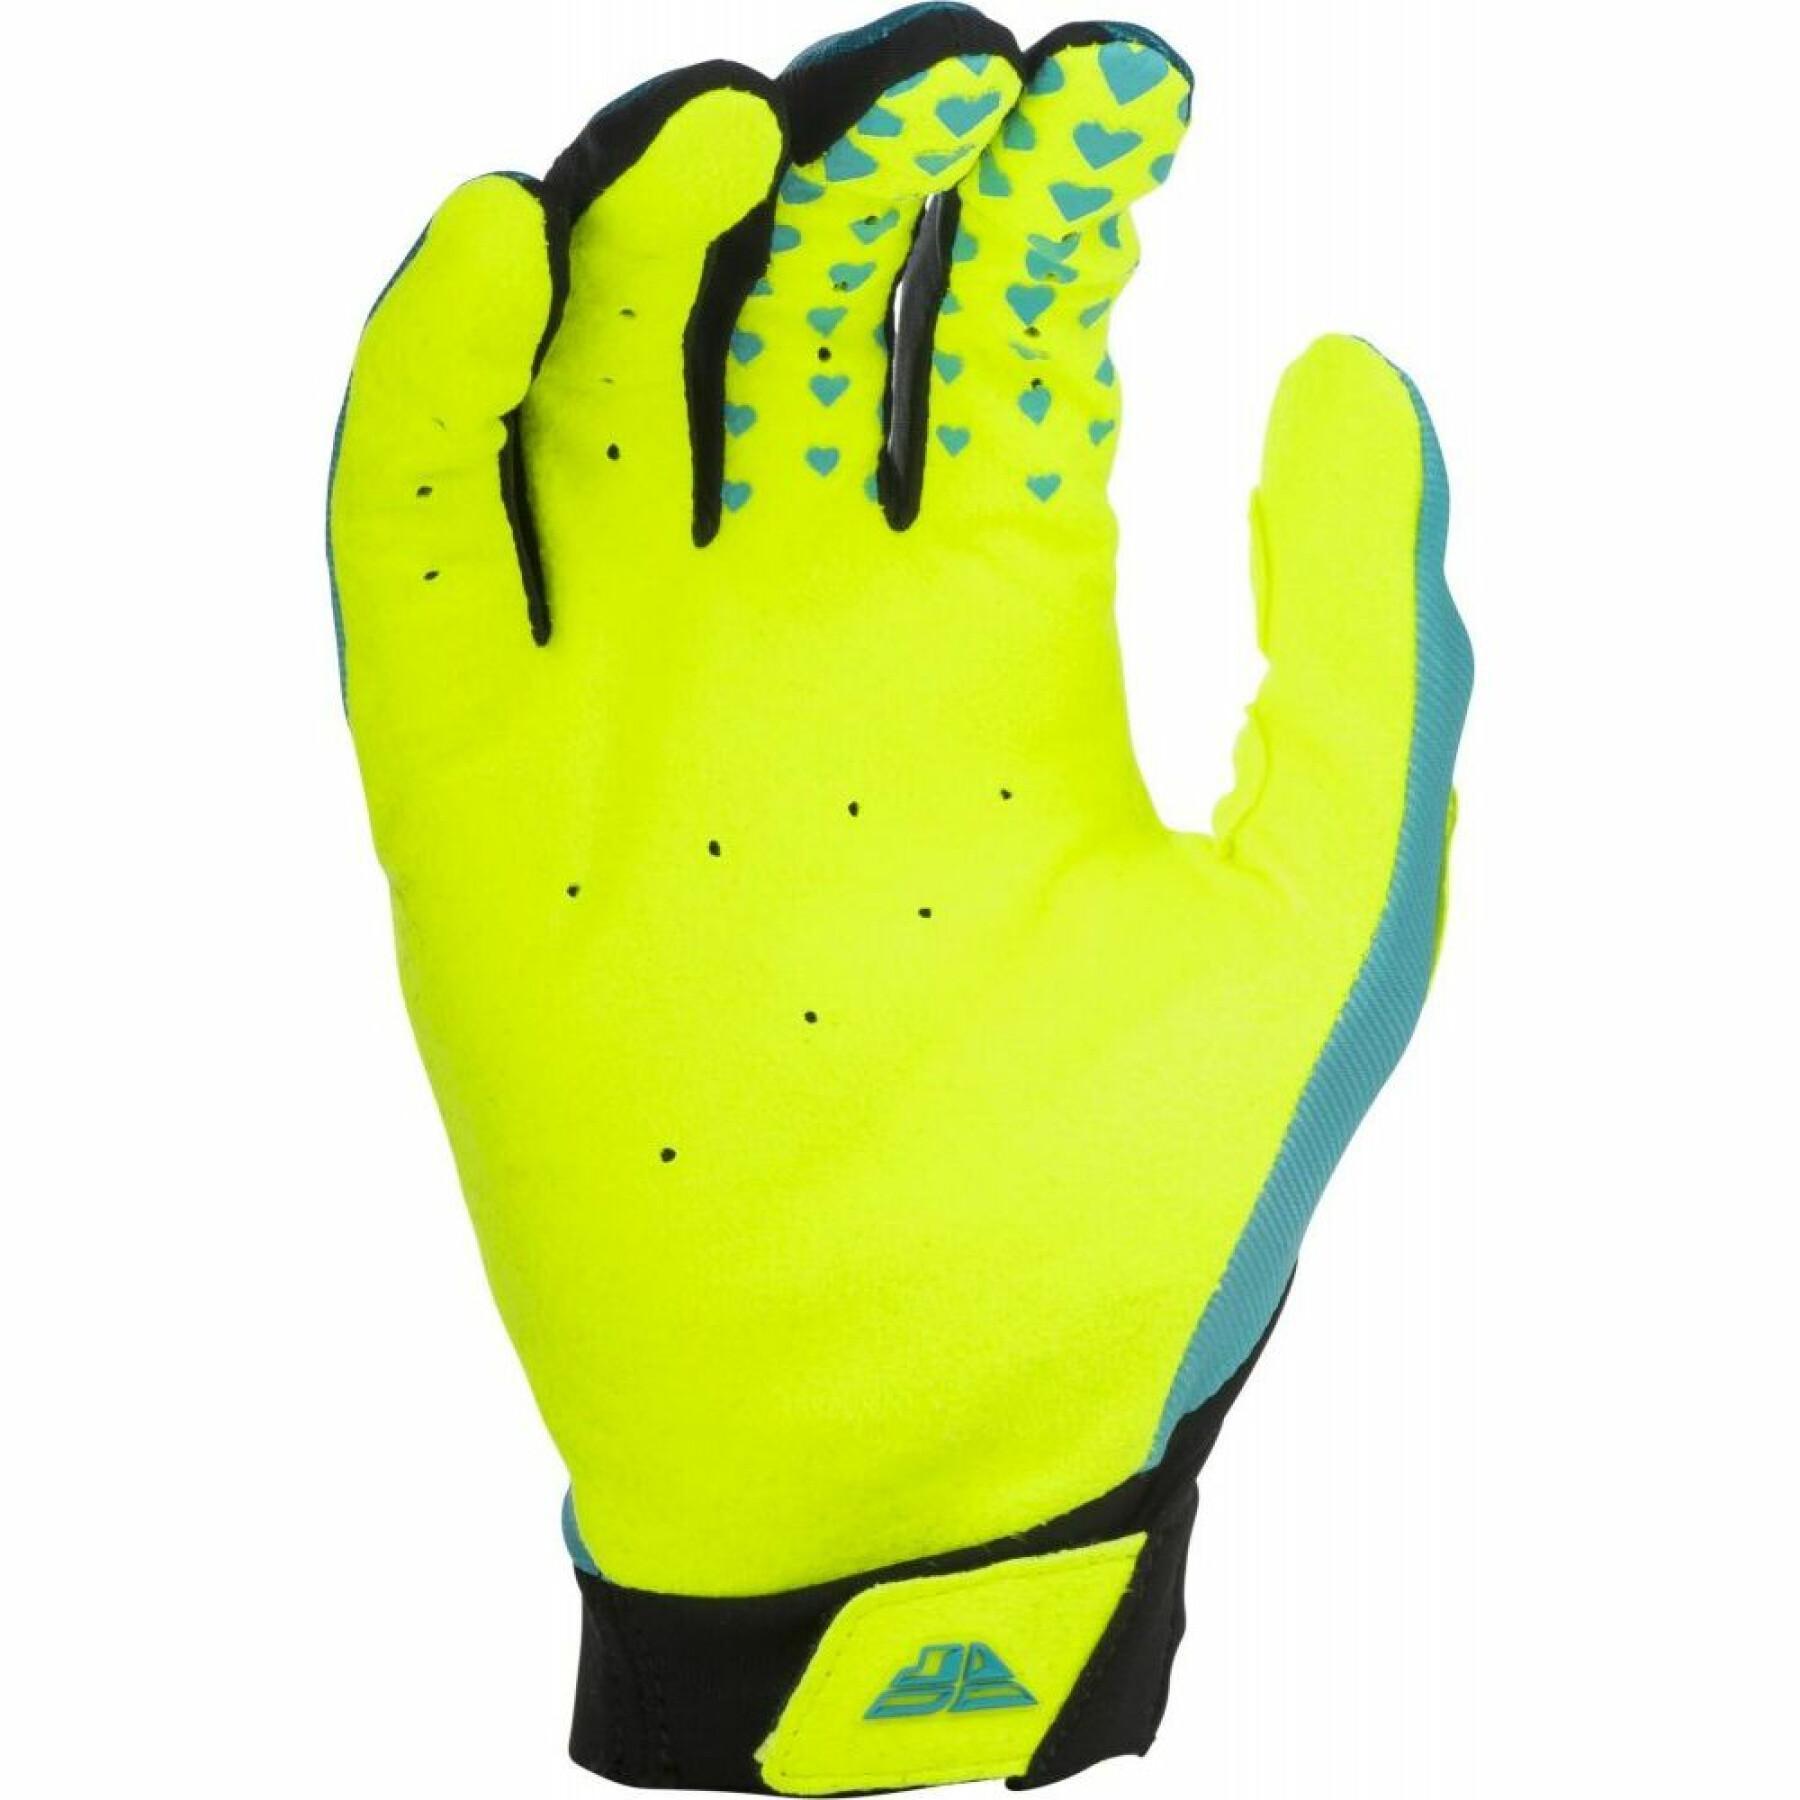 Long gloves woman Fly Racing Pro Lite 2019